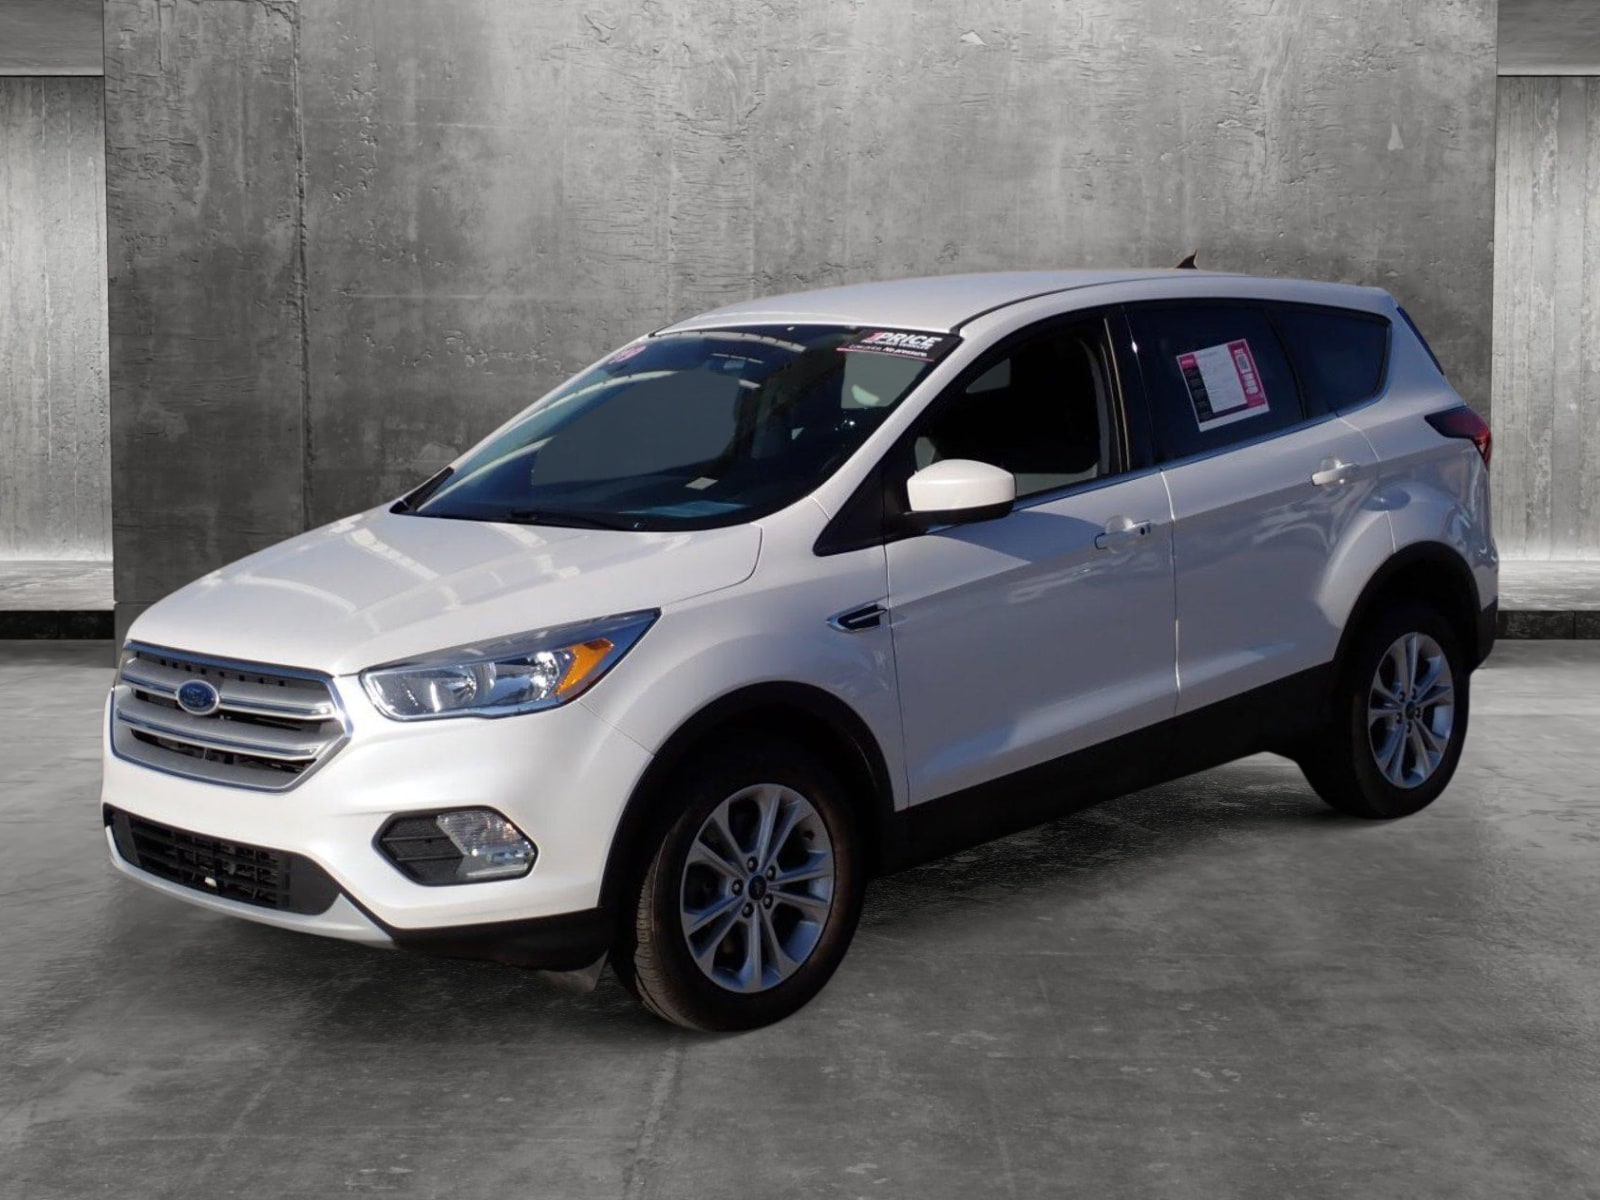 Used 2019 Ford Escape SE with VIN 1FMCU9GD7KUC24291 for sale in Golden, CO